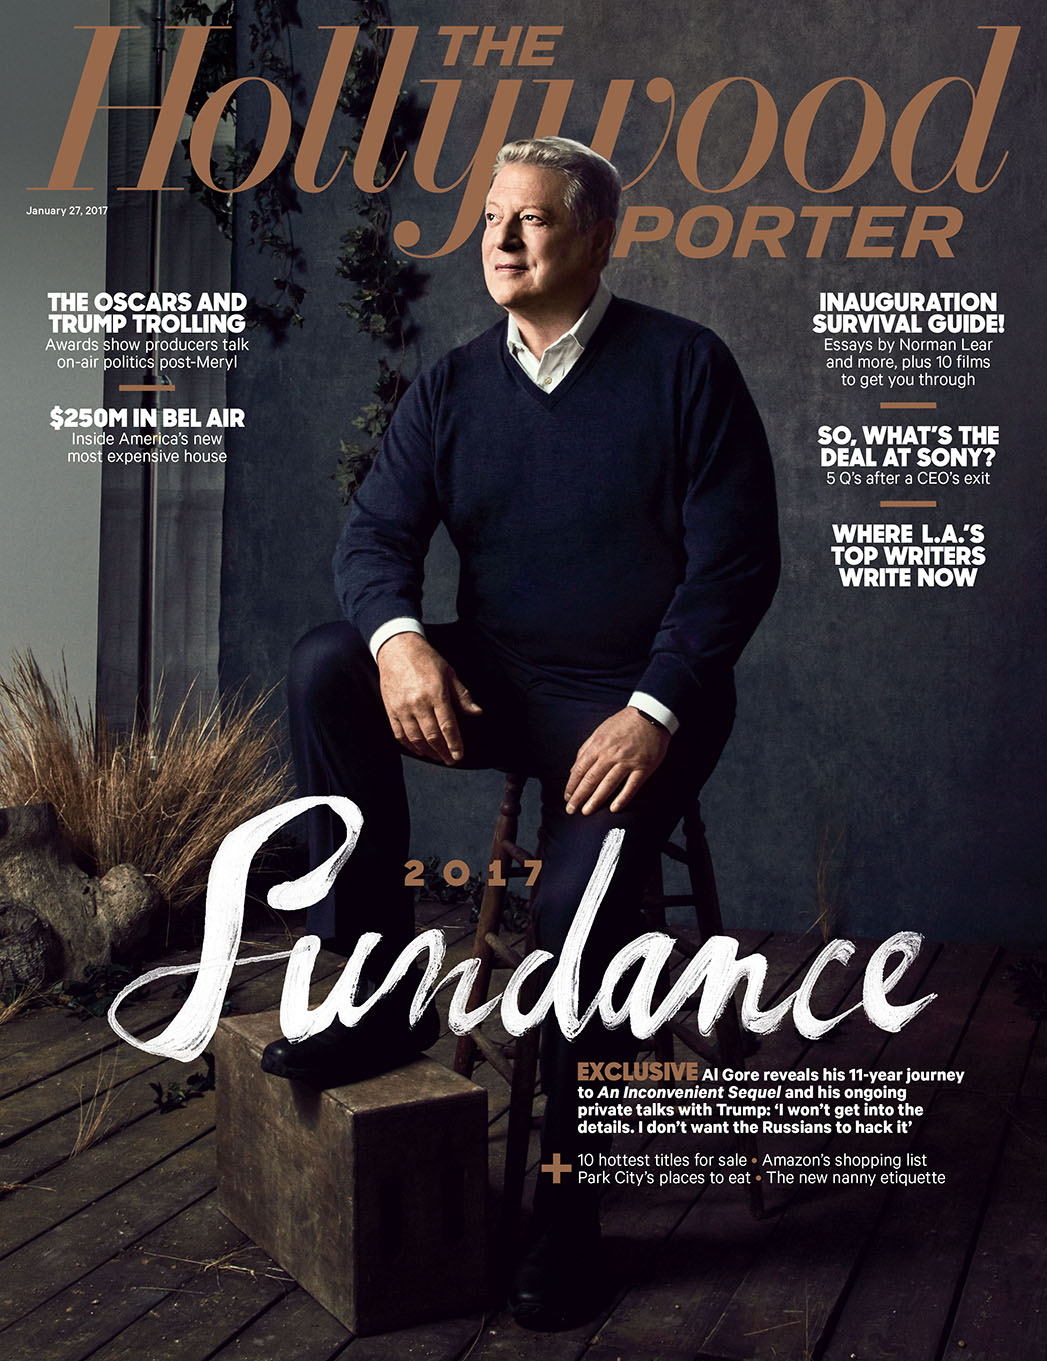 Shot at Quixote: Al Gore by Koury Angelo for The Hollywood Reporter